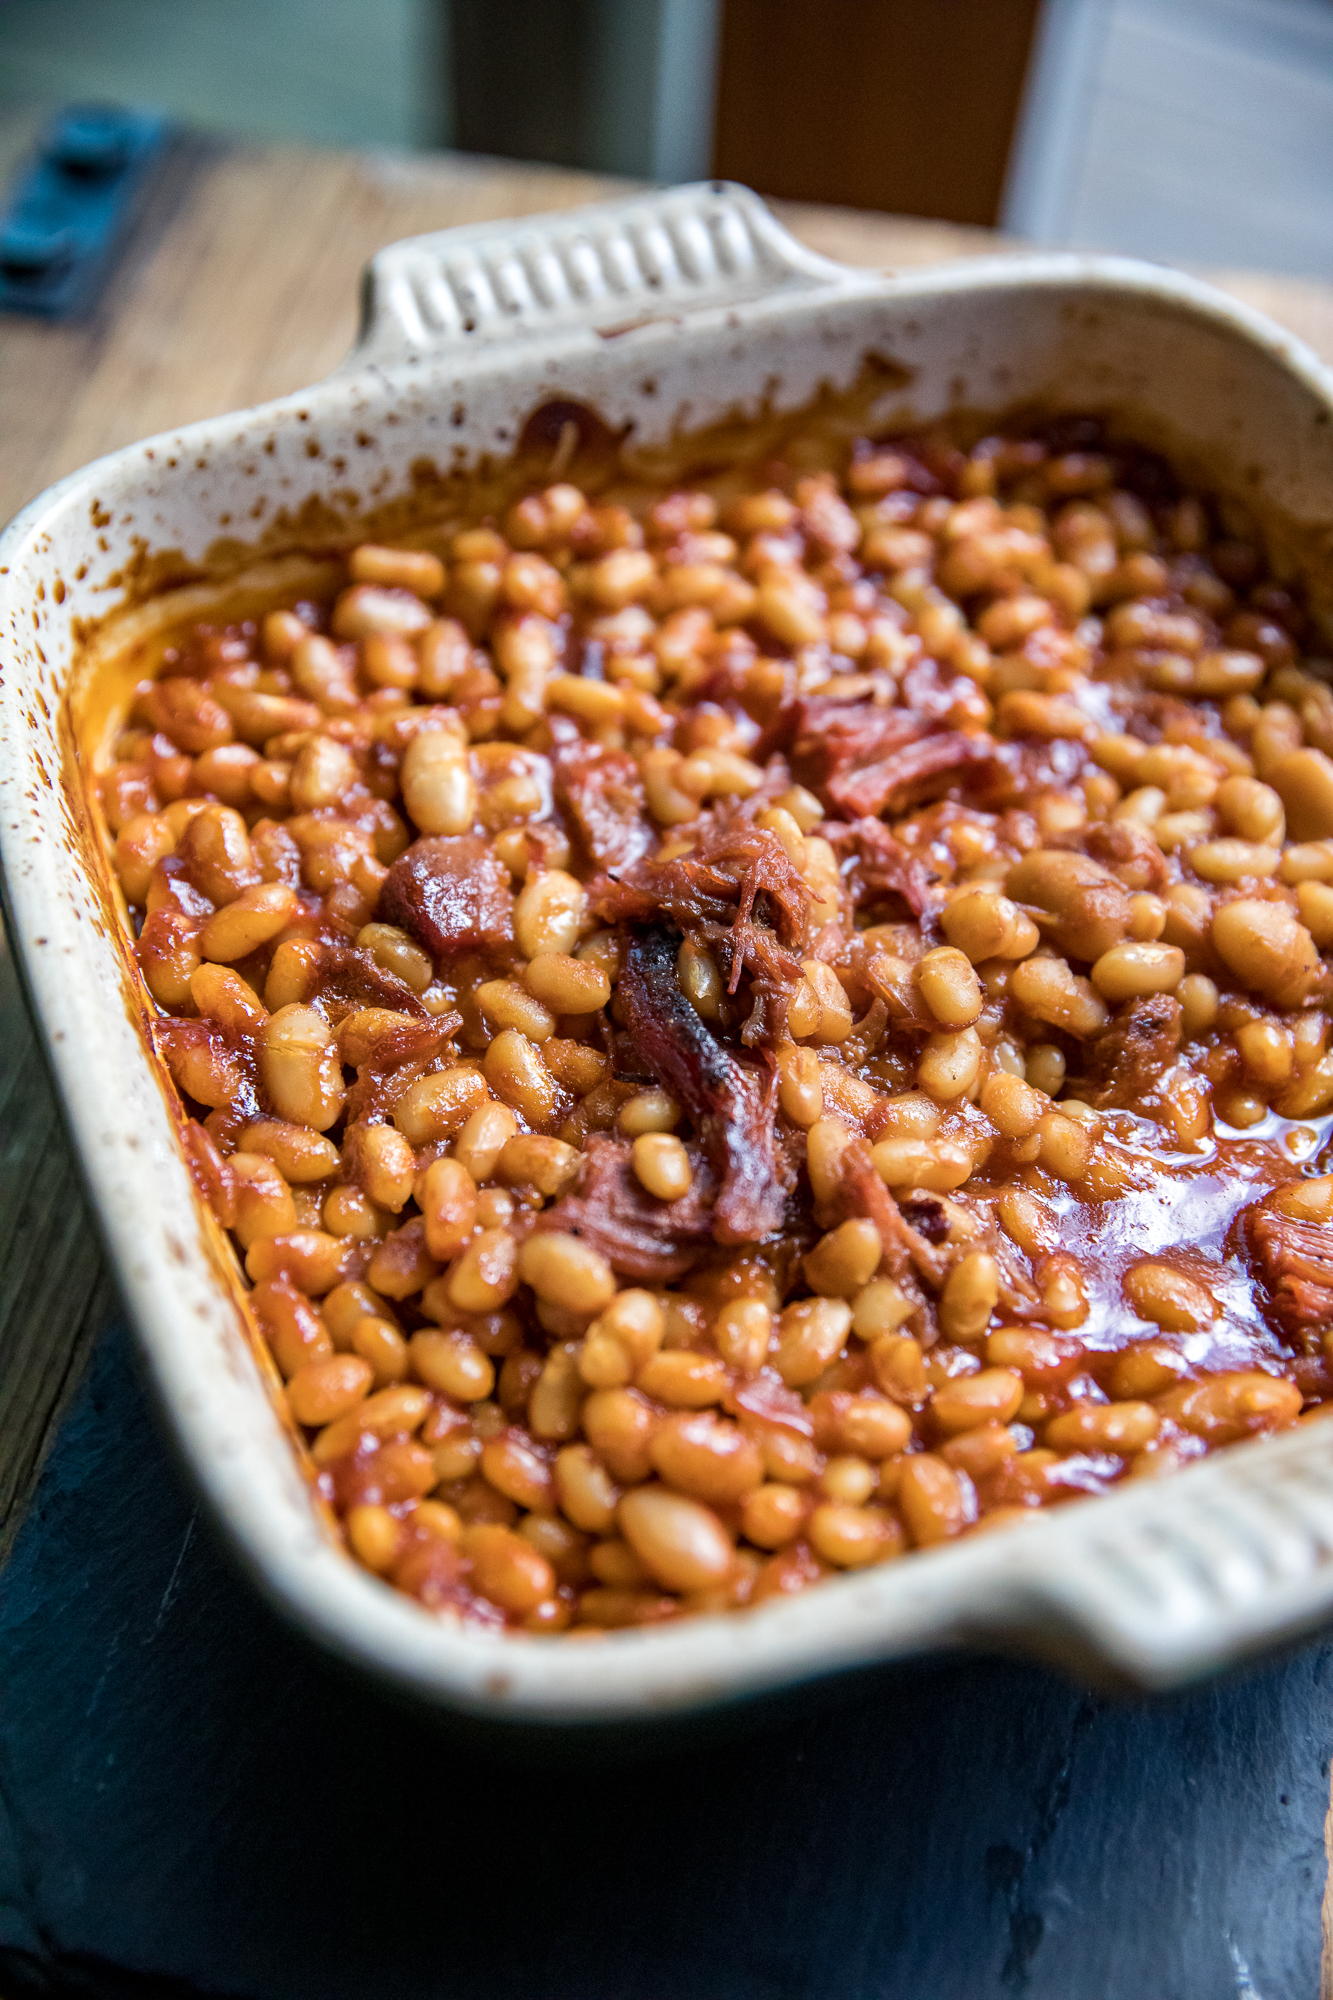 Smoked Pulled Pork Baked Beans